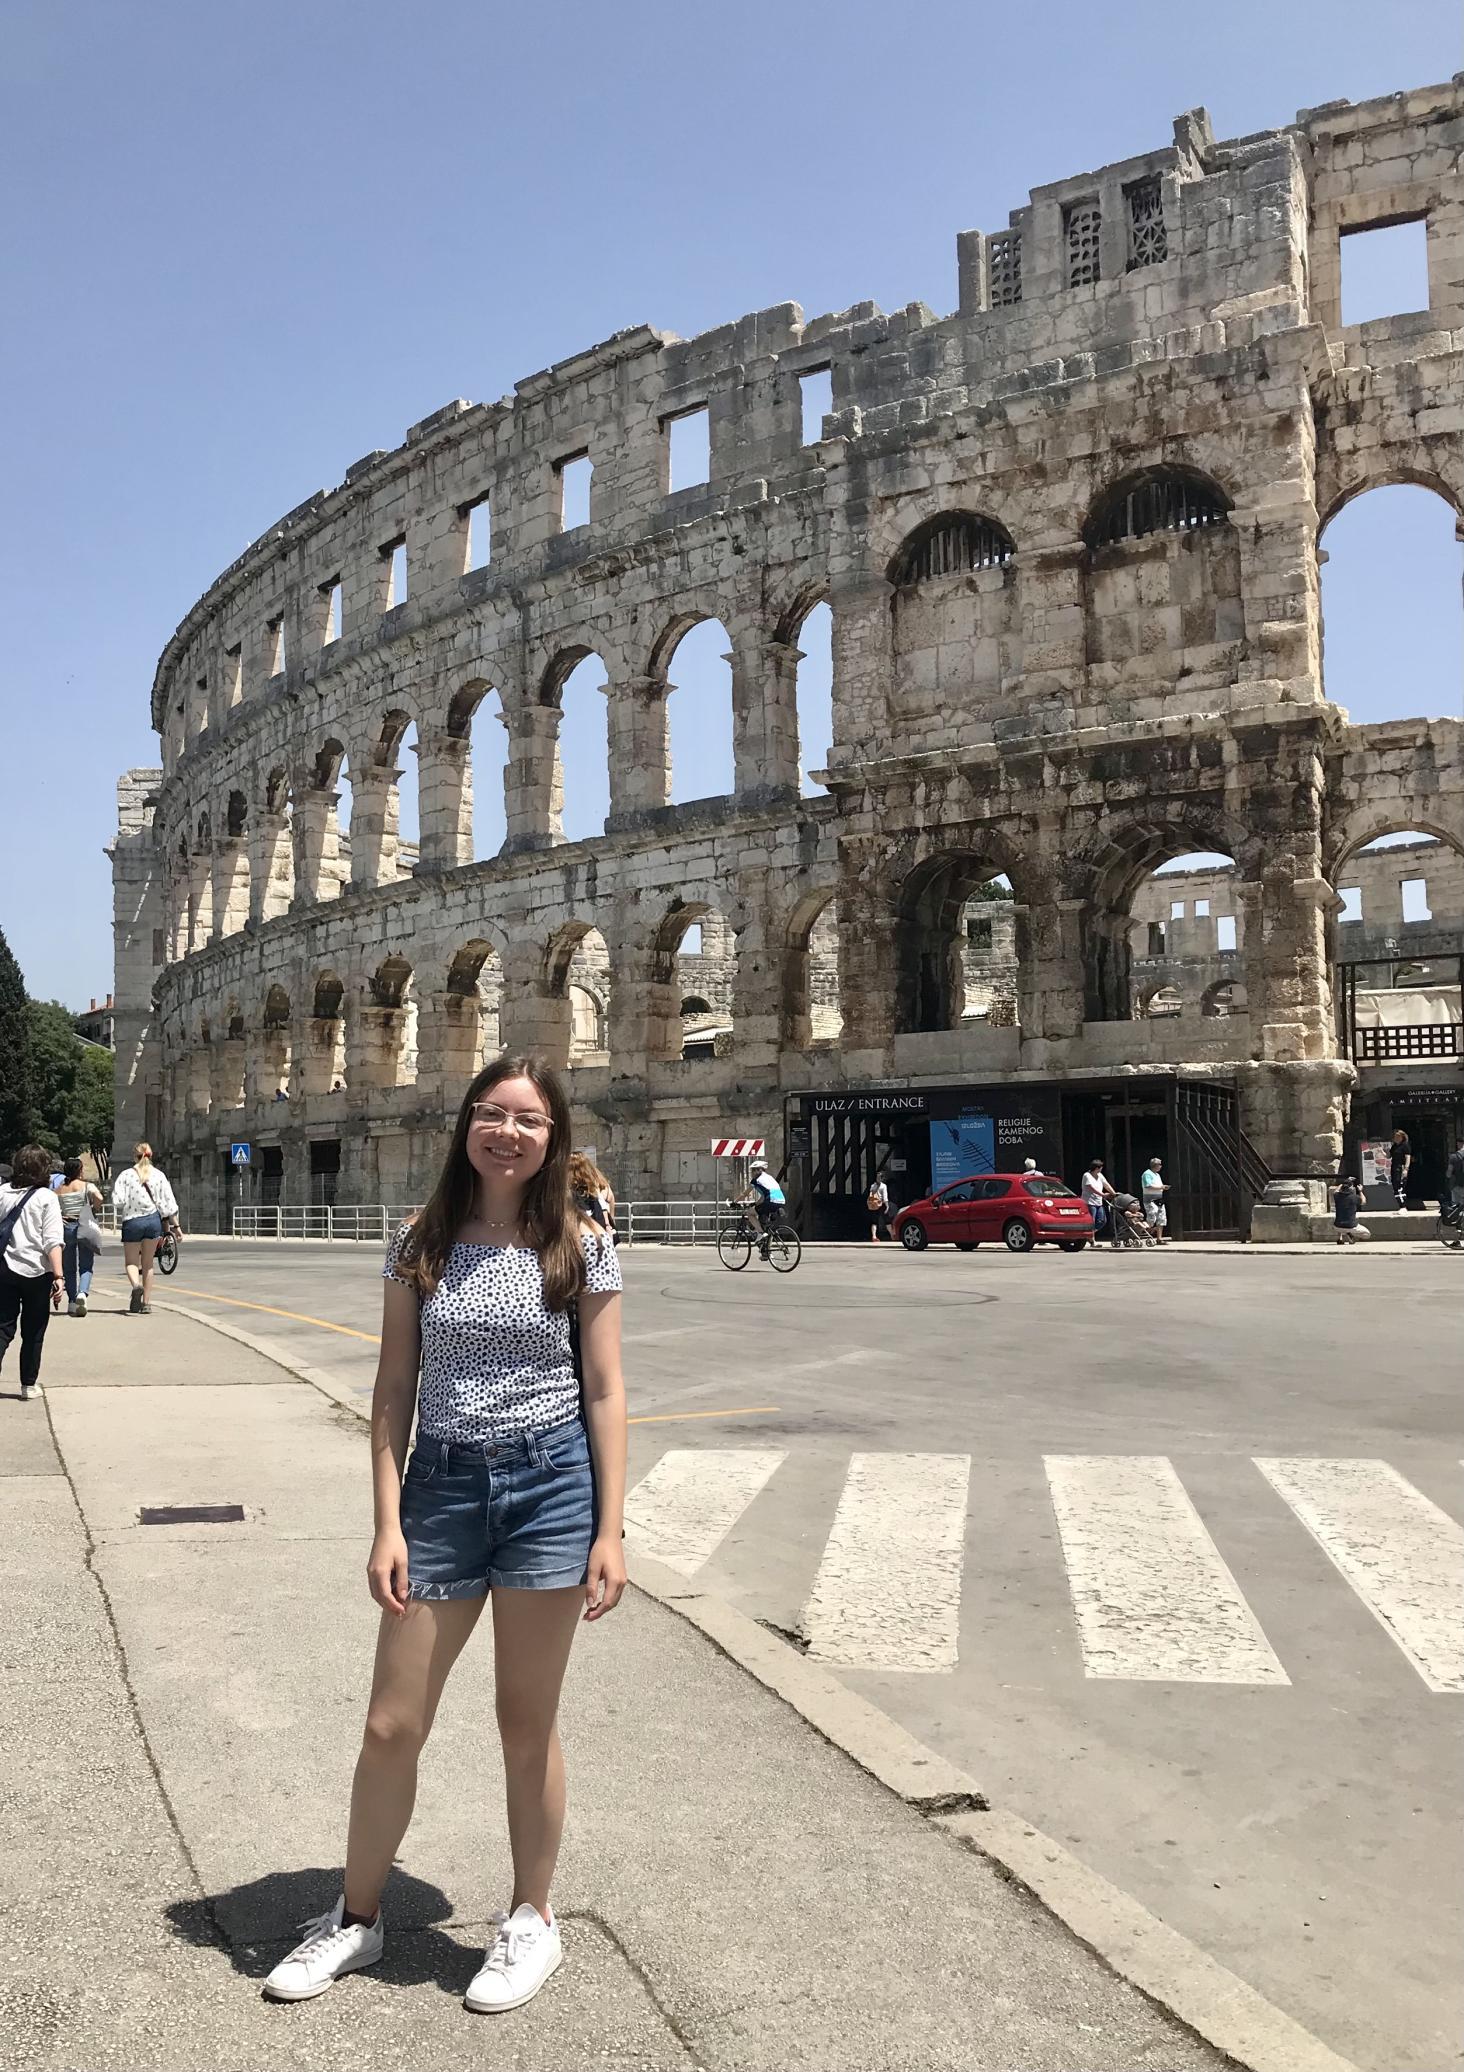 "This summer I went to Croatia for the Heritage Conservation & Archaeology study abroad! Here's a picture of me outside the Pula Arena, one of the largest and most well-preserved Roman amphitheaters in the world." -Sophie Forbes